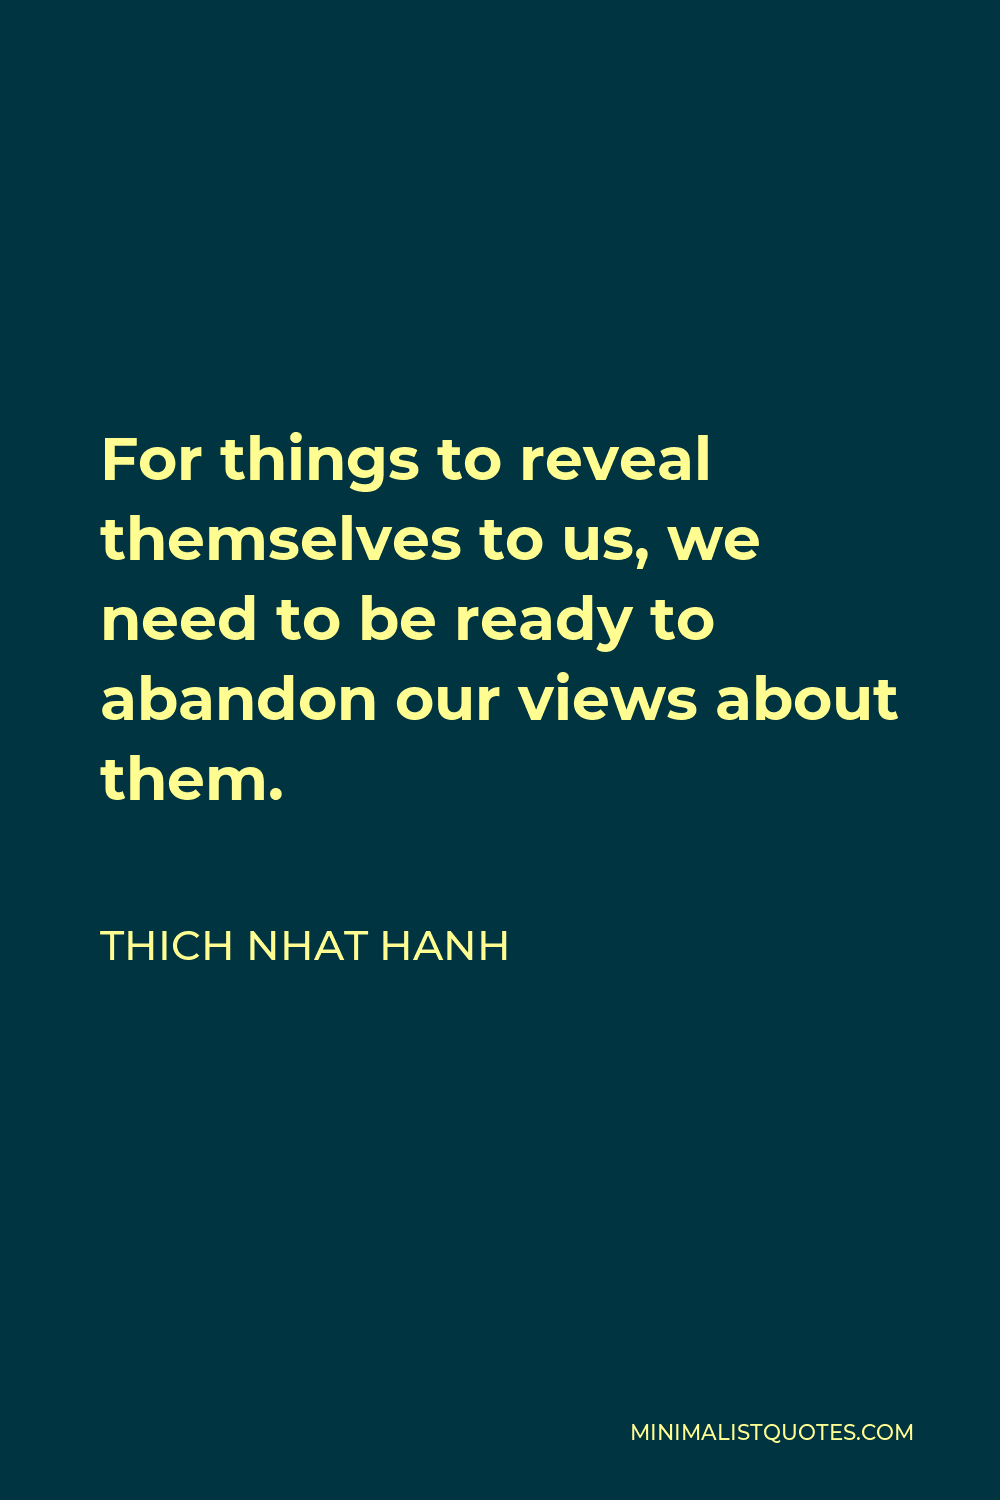 Thich Nhat Hanh Quote - For things to reveal themselves to us, we need to be ready to abandon our views about them.